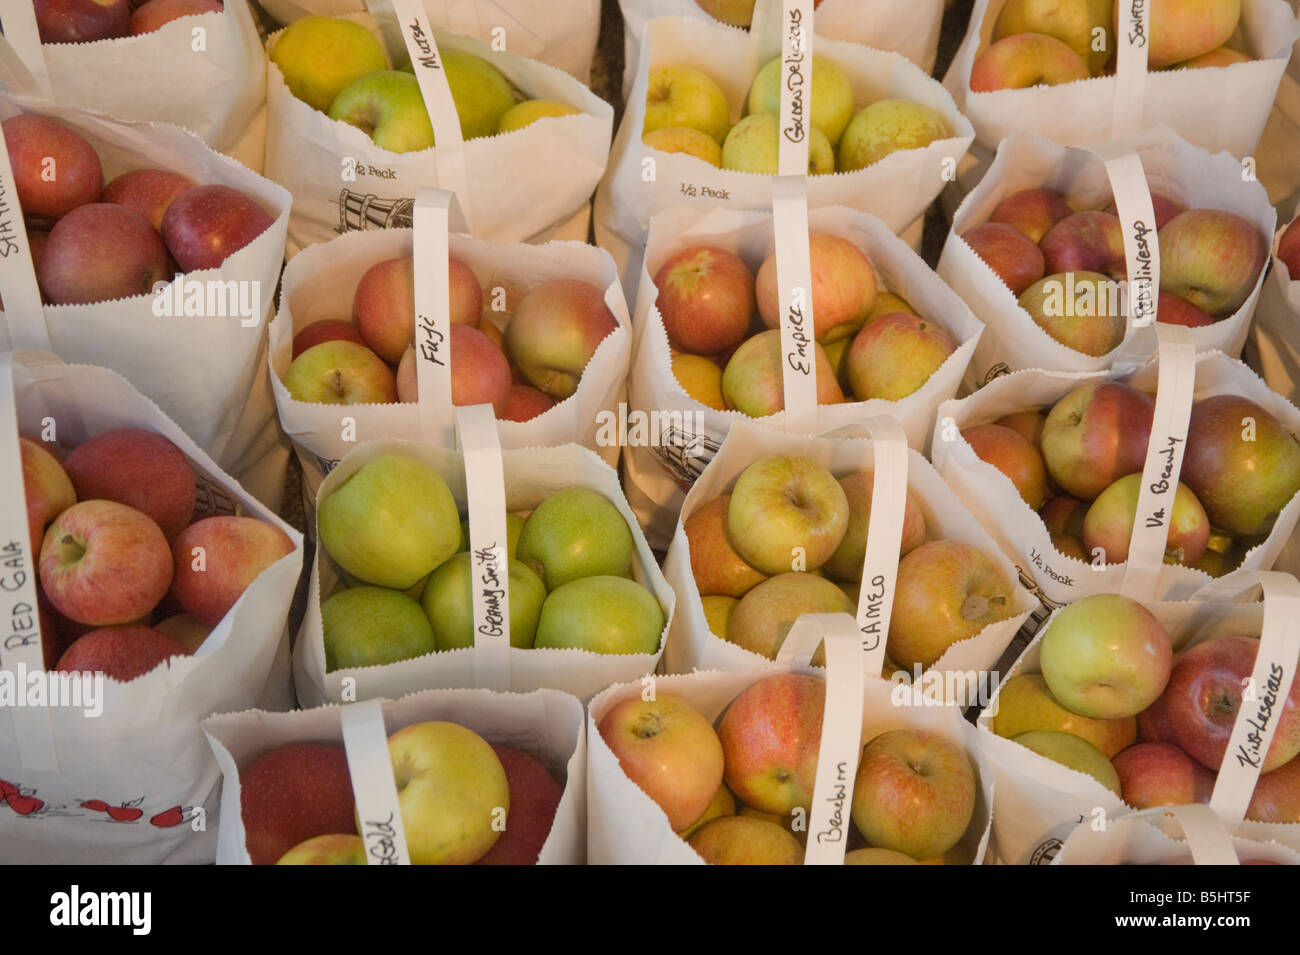 Apples on sale in rural North Carolina, USA Stock Photo